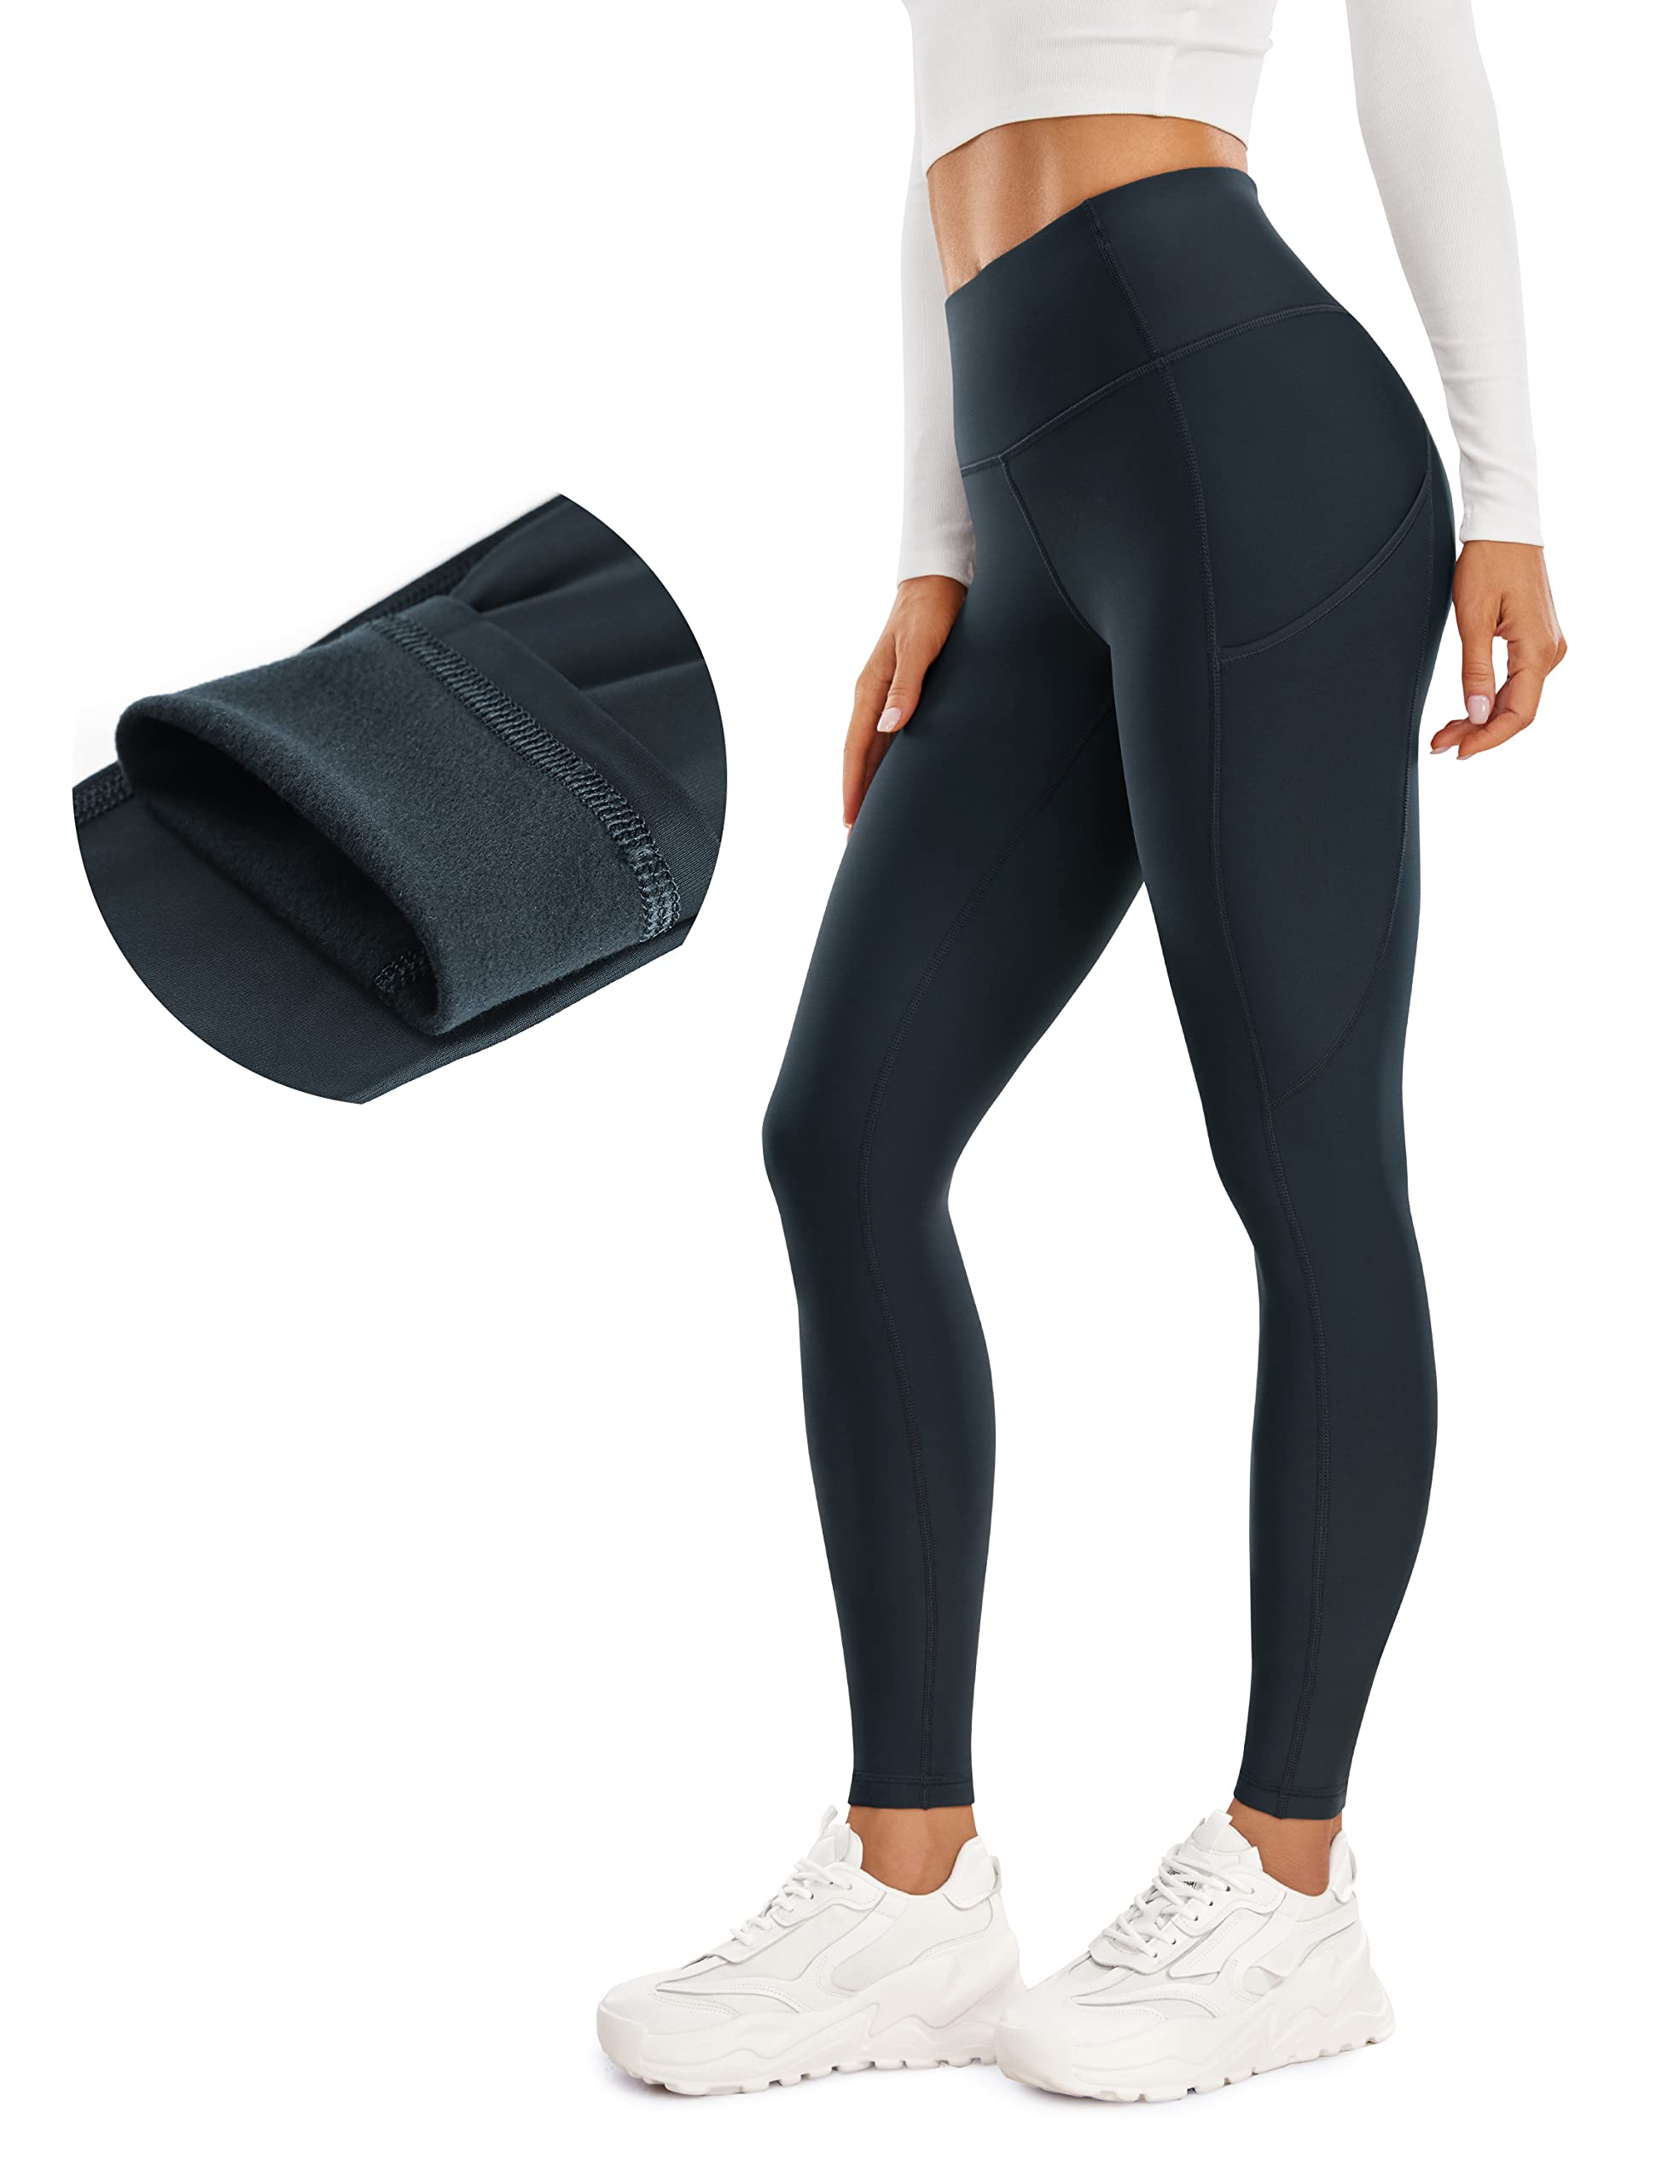 CRZ YOGA cRZ YOgA Thermal Fleece Lined Leggings Women 28 - Winter Warm High  Waisted Hiking Pants with Pockets Workout Running Tights True